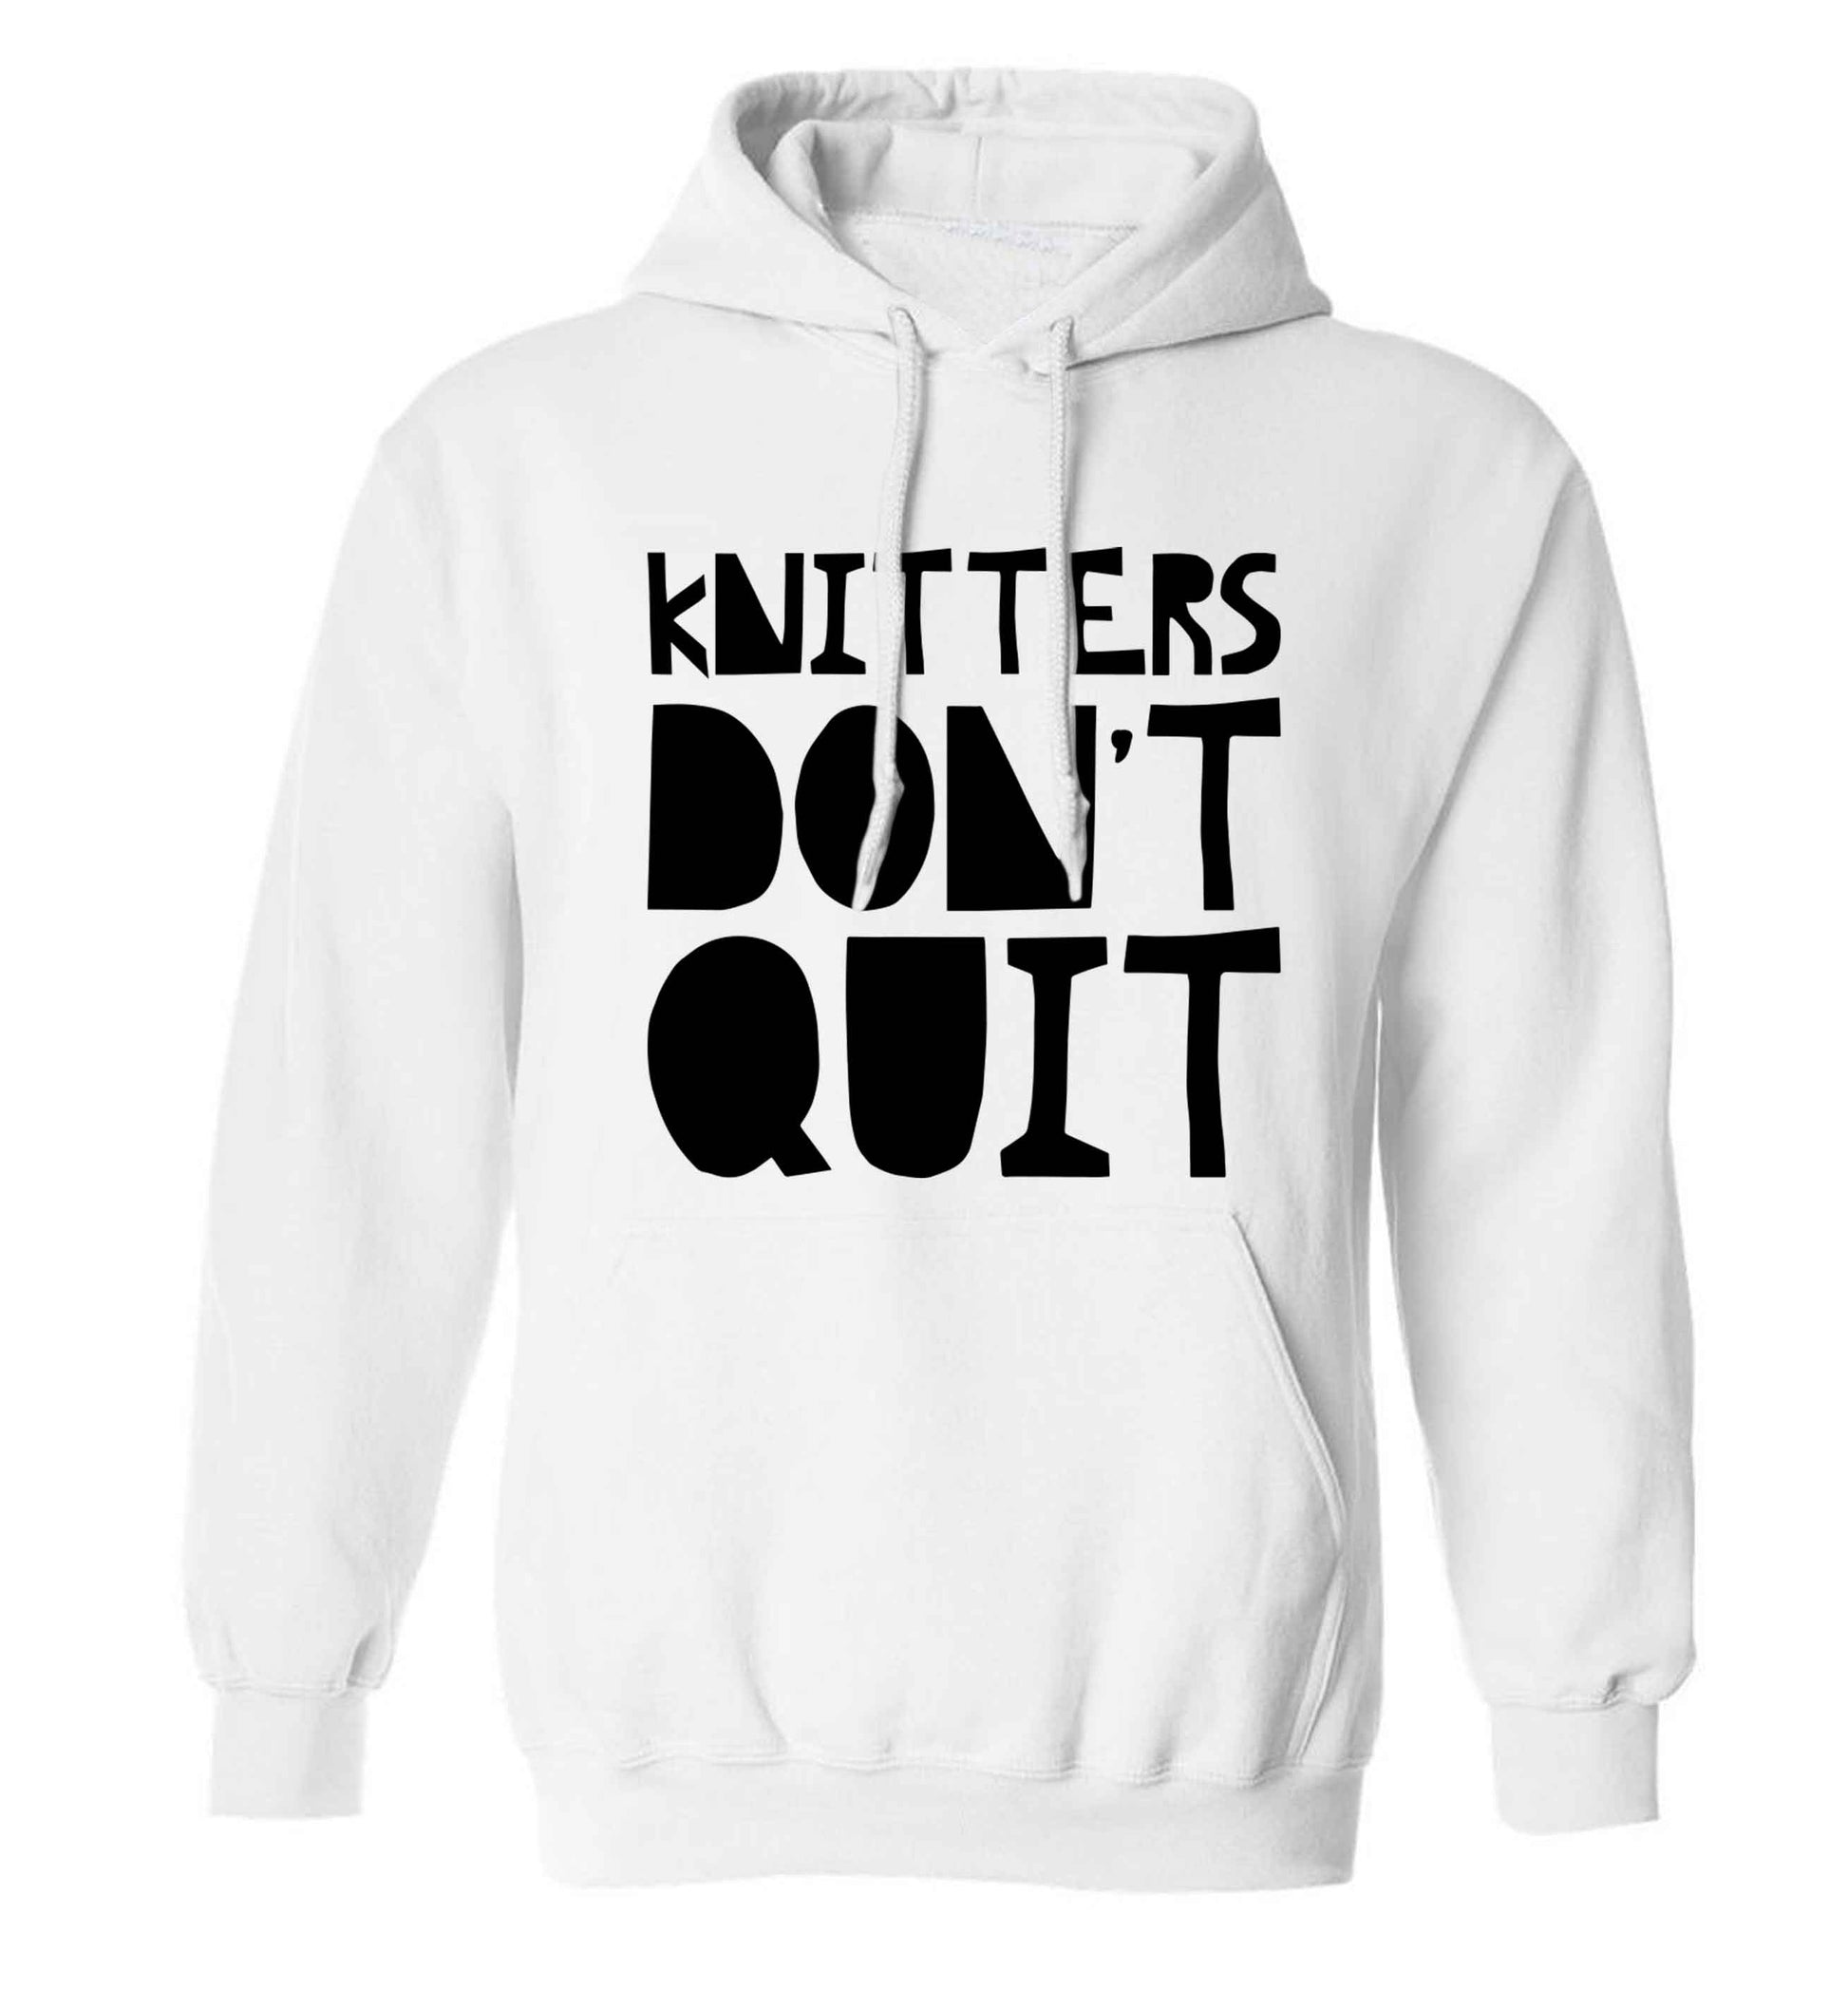 Knitters don't quit adults unisex white hoodie 2XL